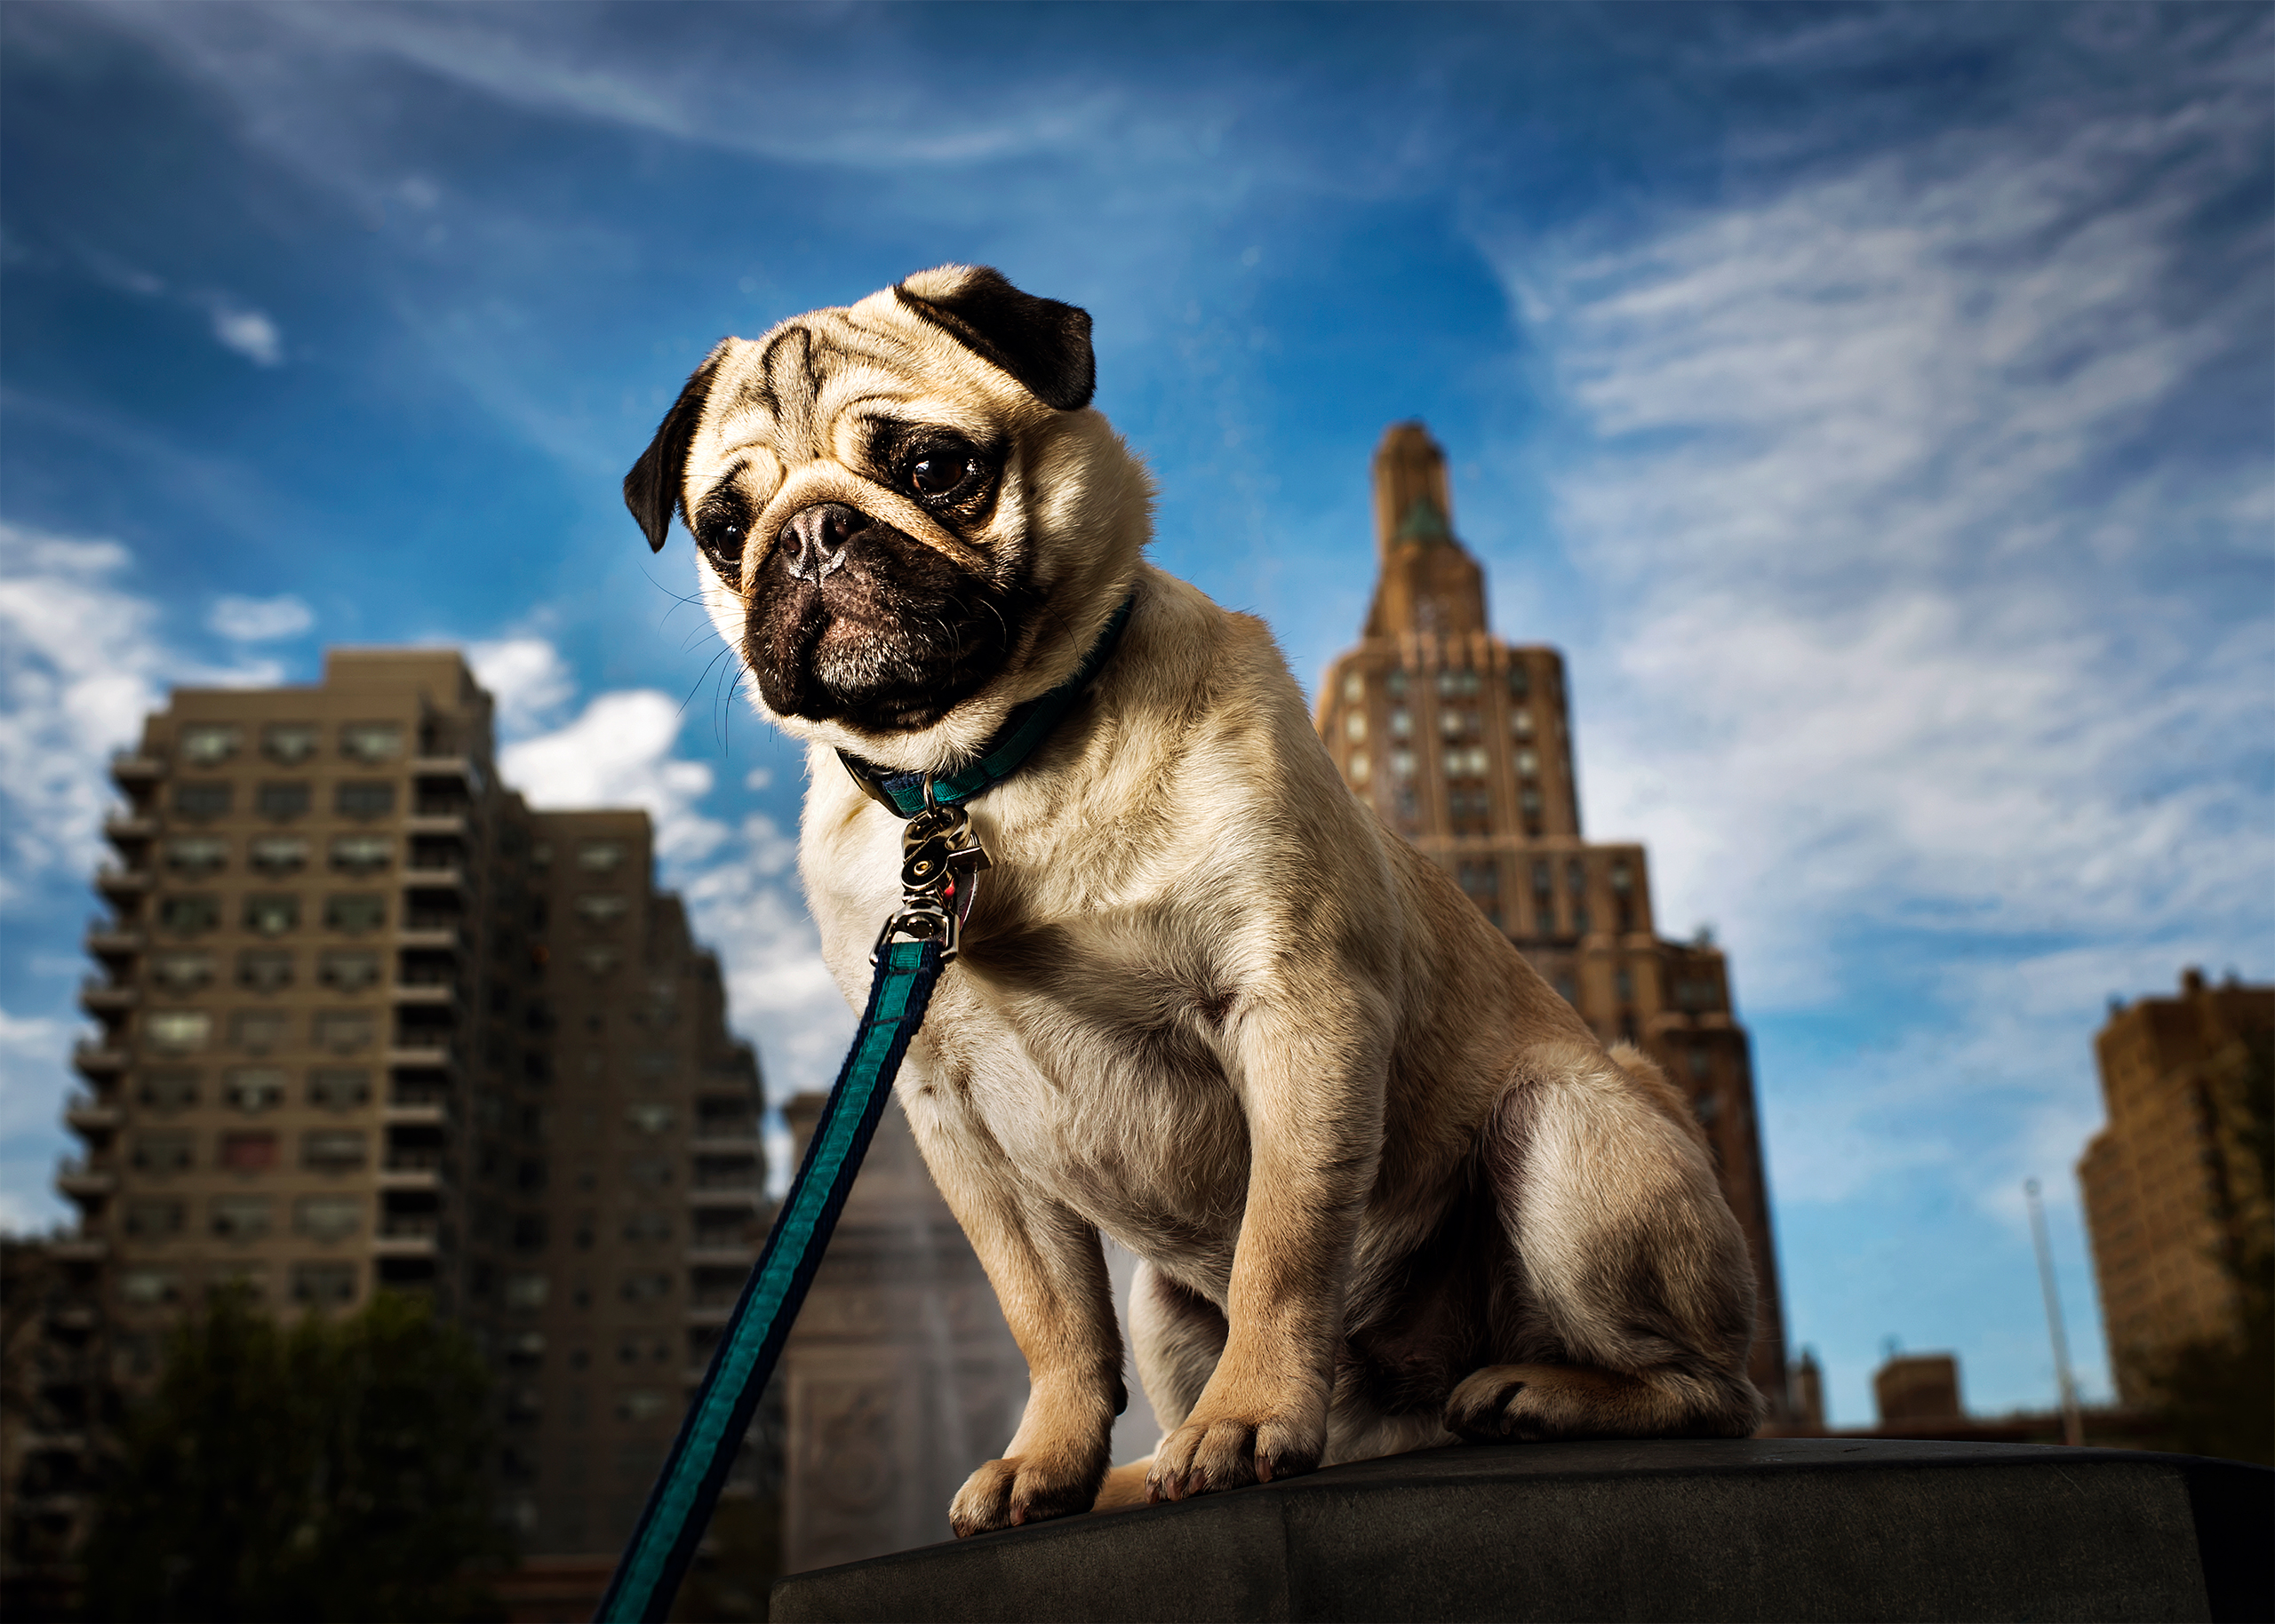 Bucky, a 1 1/2 year old Pug photographed in New York, NY on April 23, 2017. (Dina Litovsky—Redux for TIME)